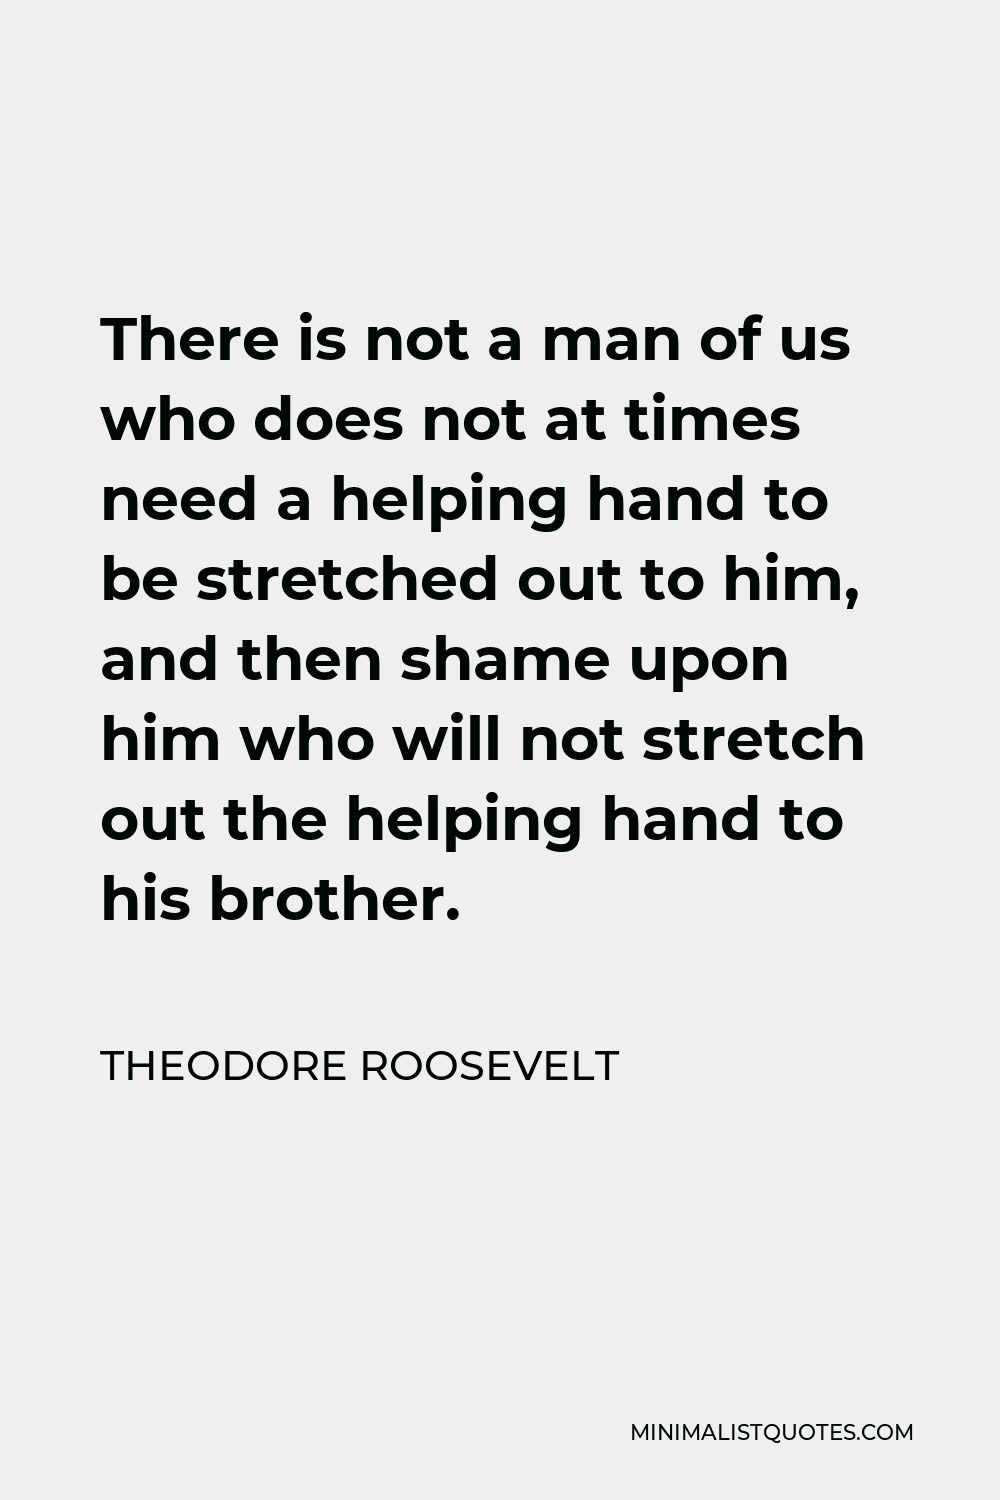 Theodore Roosevelt Quote - There is not a man of us who does not at times need a helping hand to be stretched out to him, and then shame upon him who will not stretch out the helping hand to his brother.